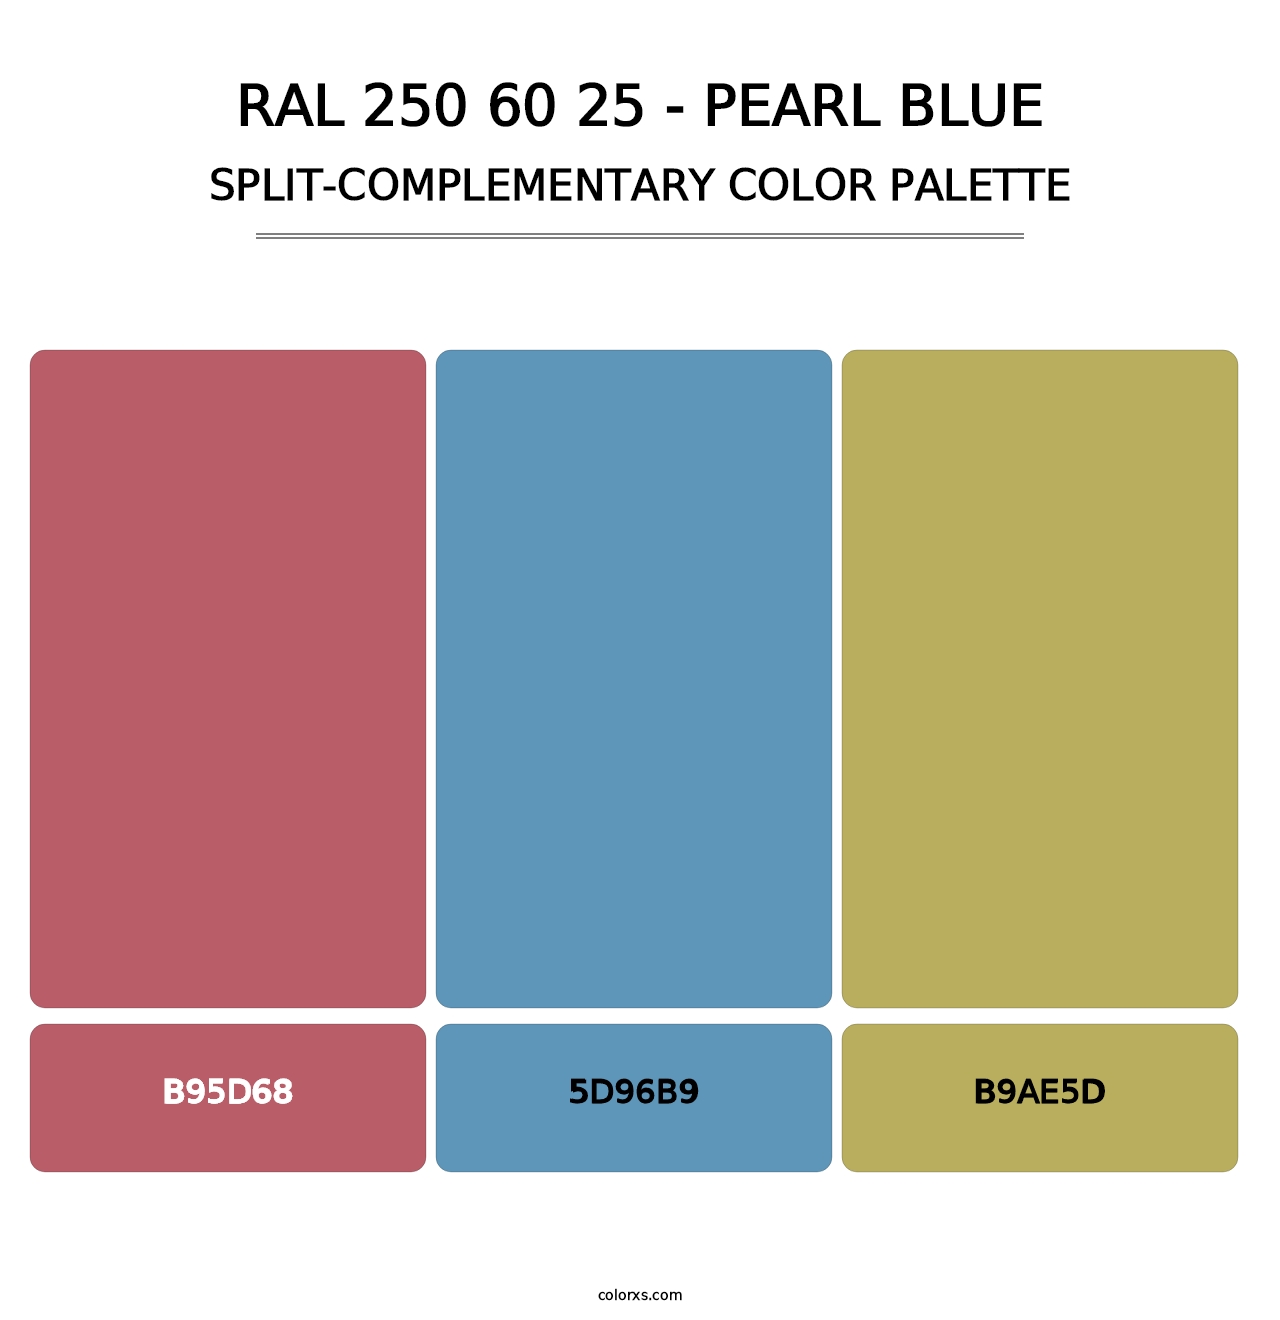 RAL 250 60 25 - Pearl Blue - Split-Complementary Color Palette